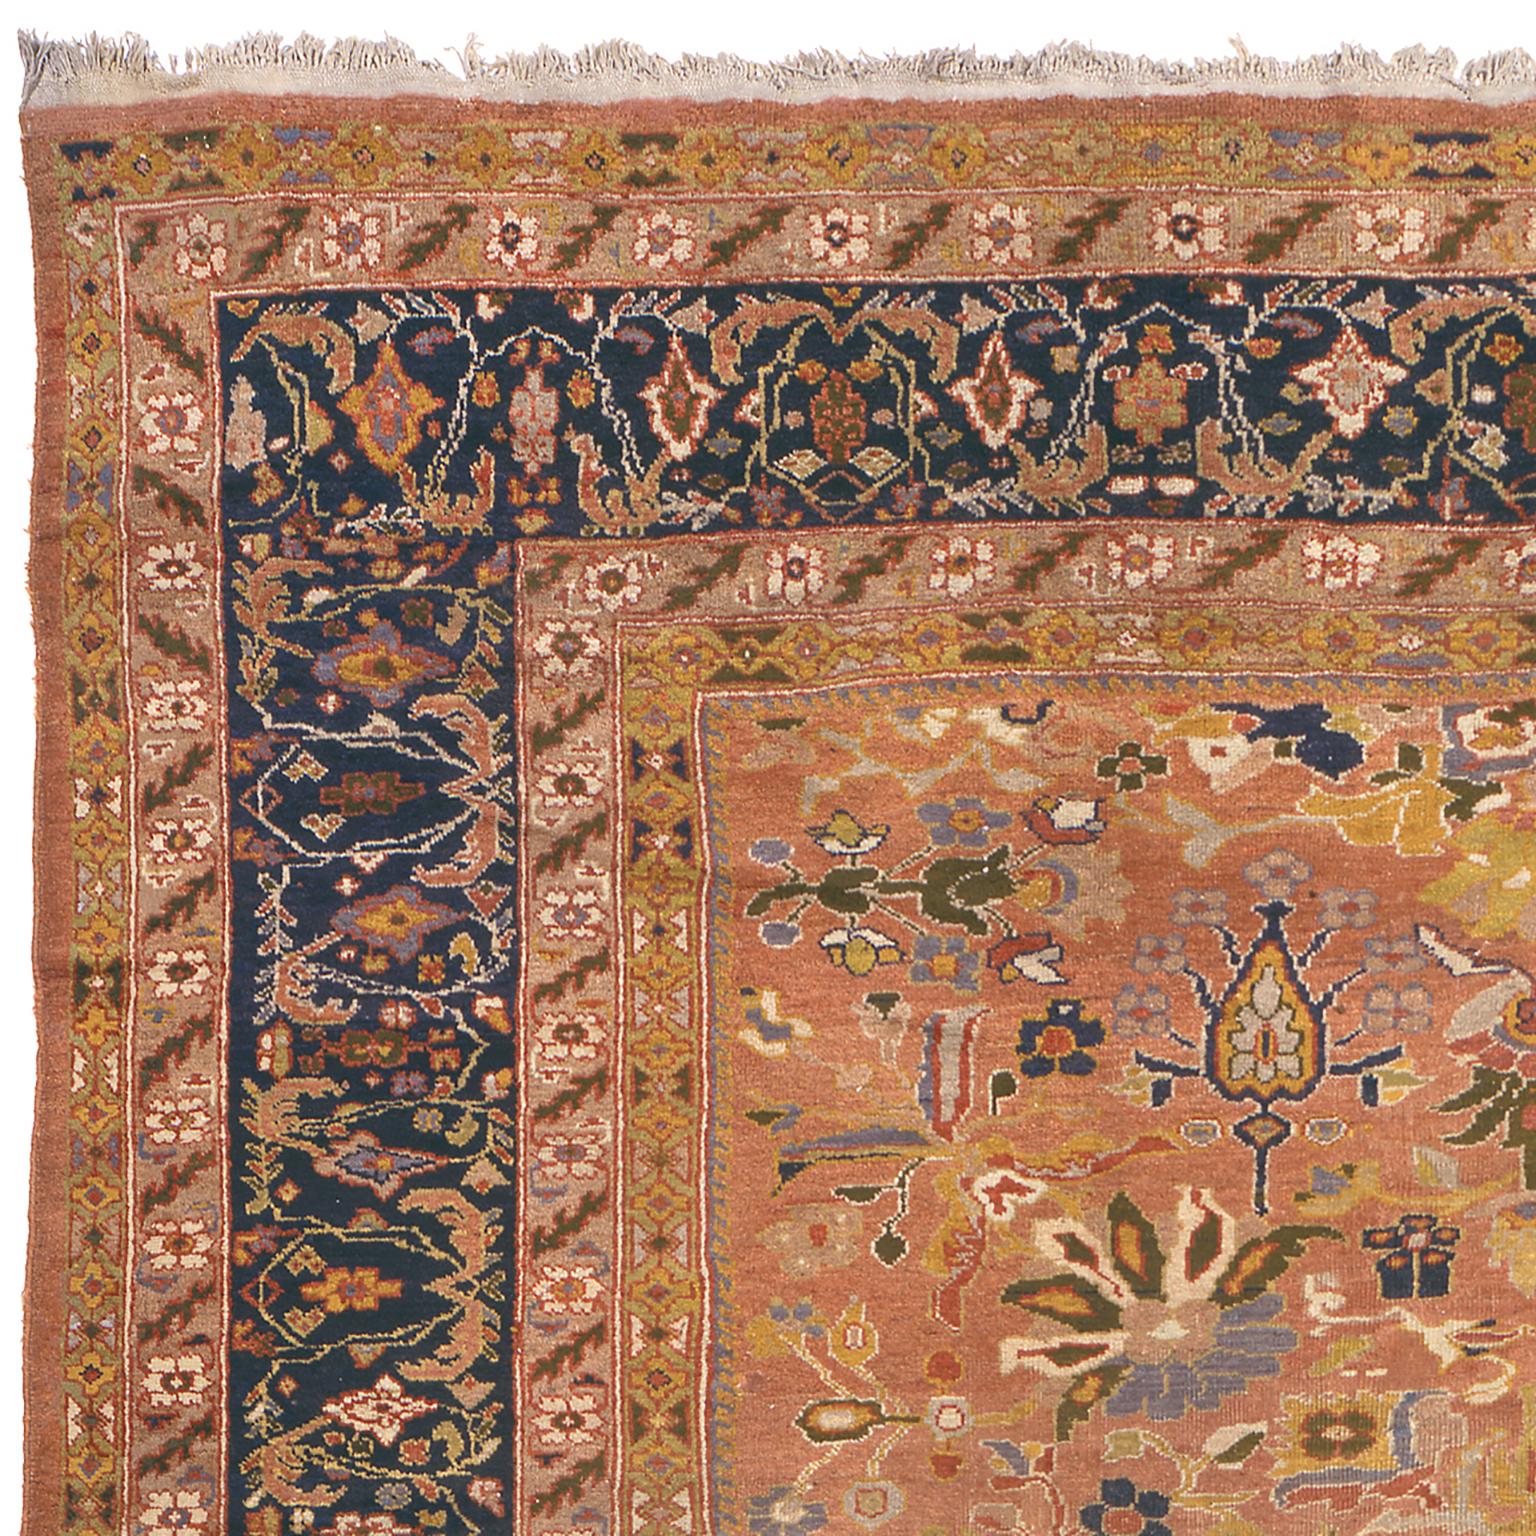 Early 20th century Persian Sultanabad rug
Persia, circa 1910
Handwoven.
   